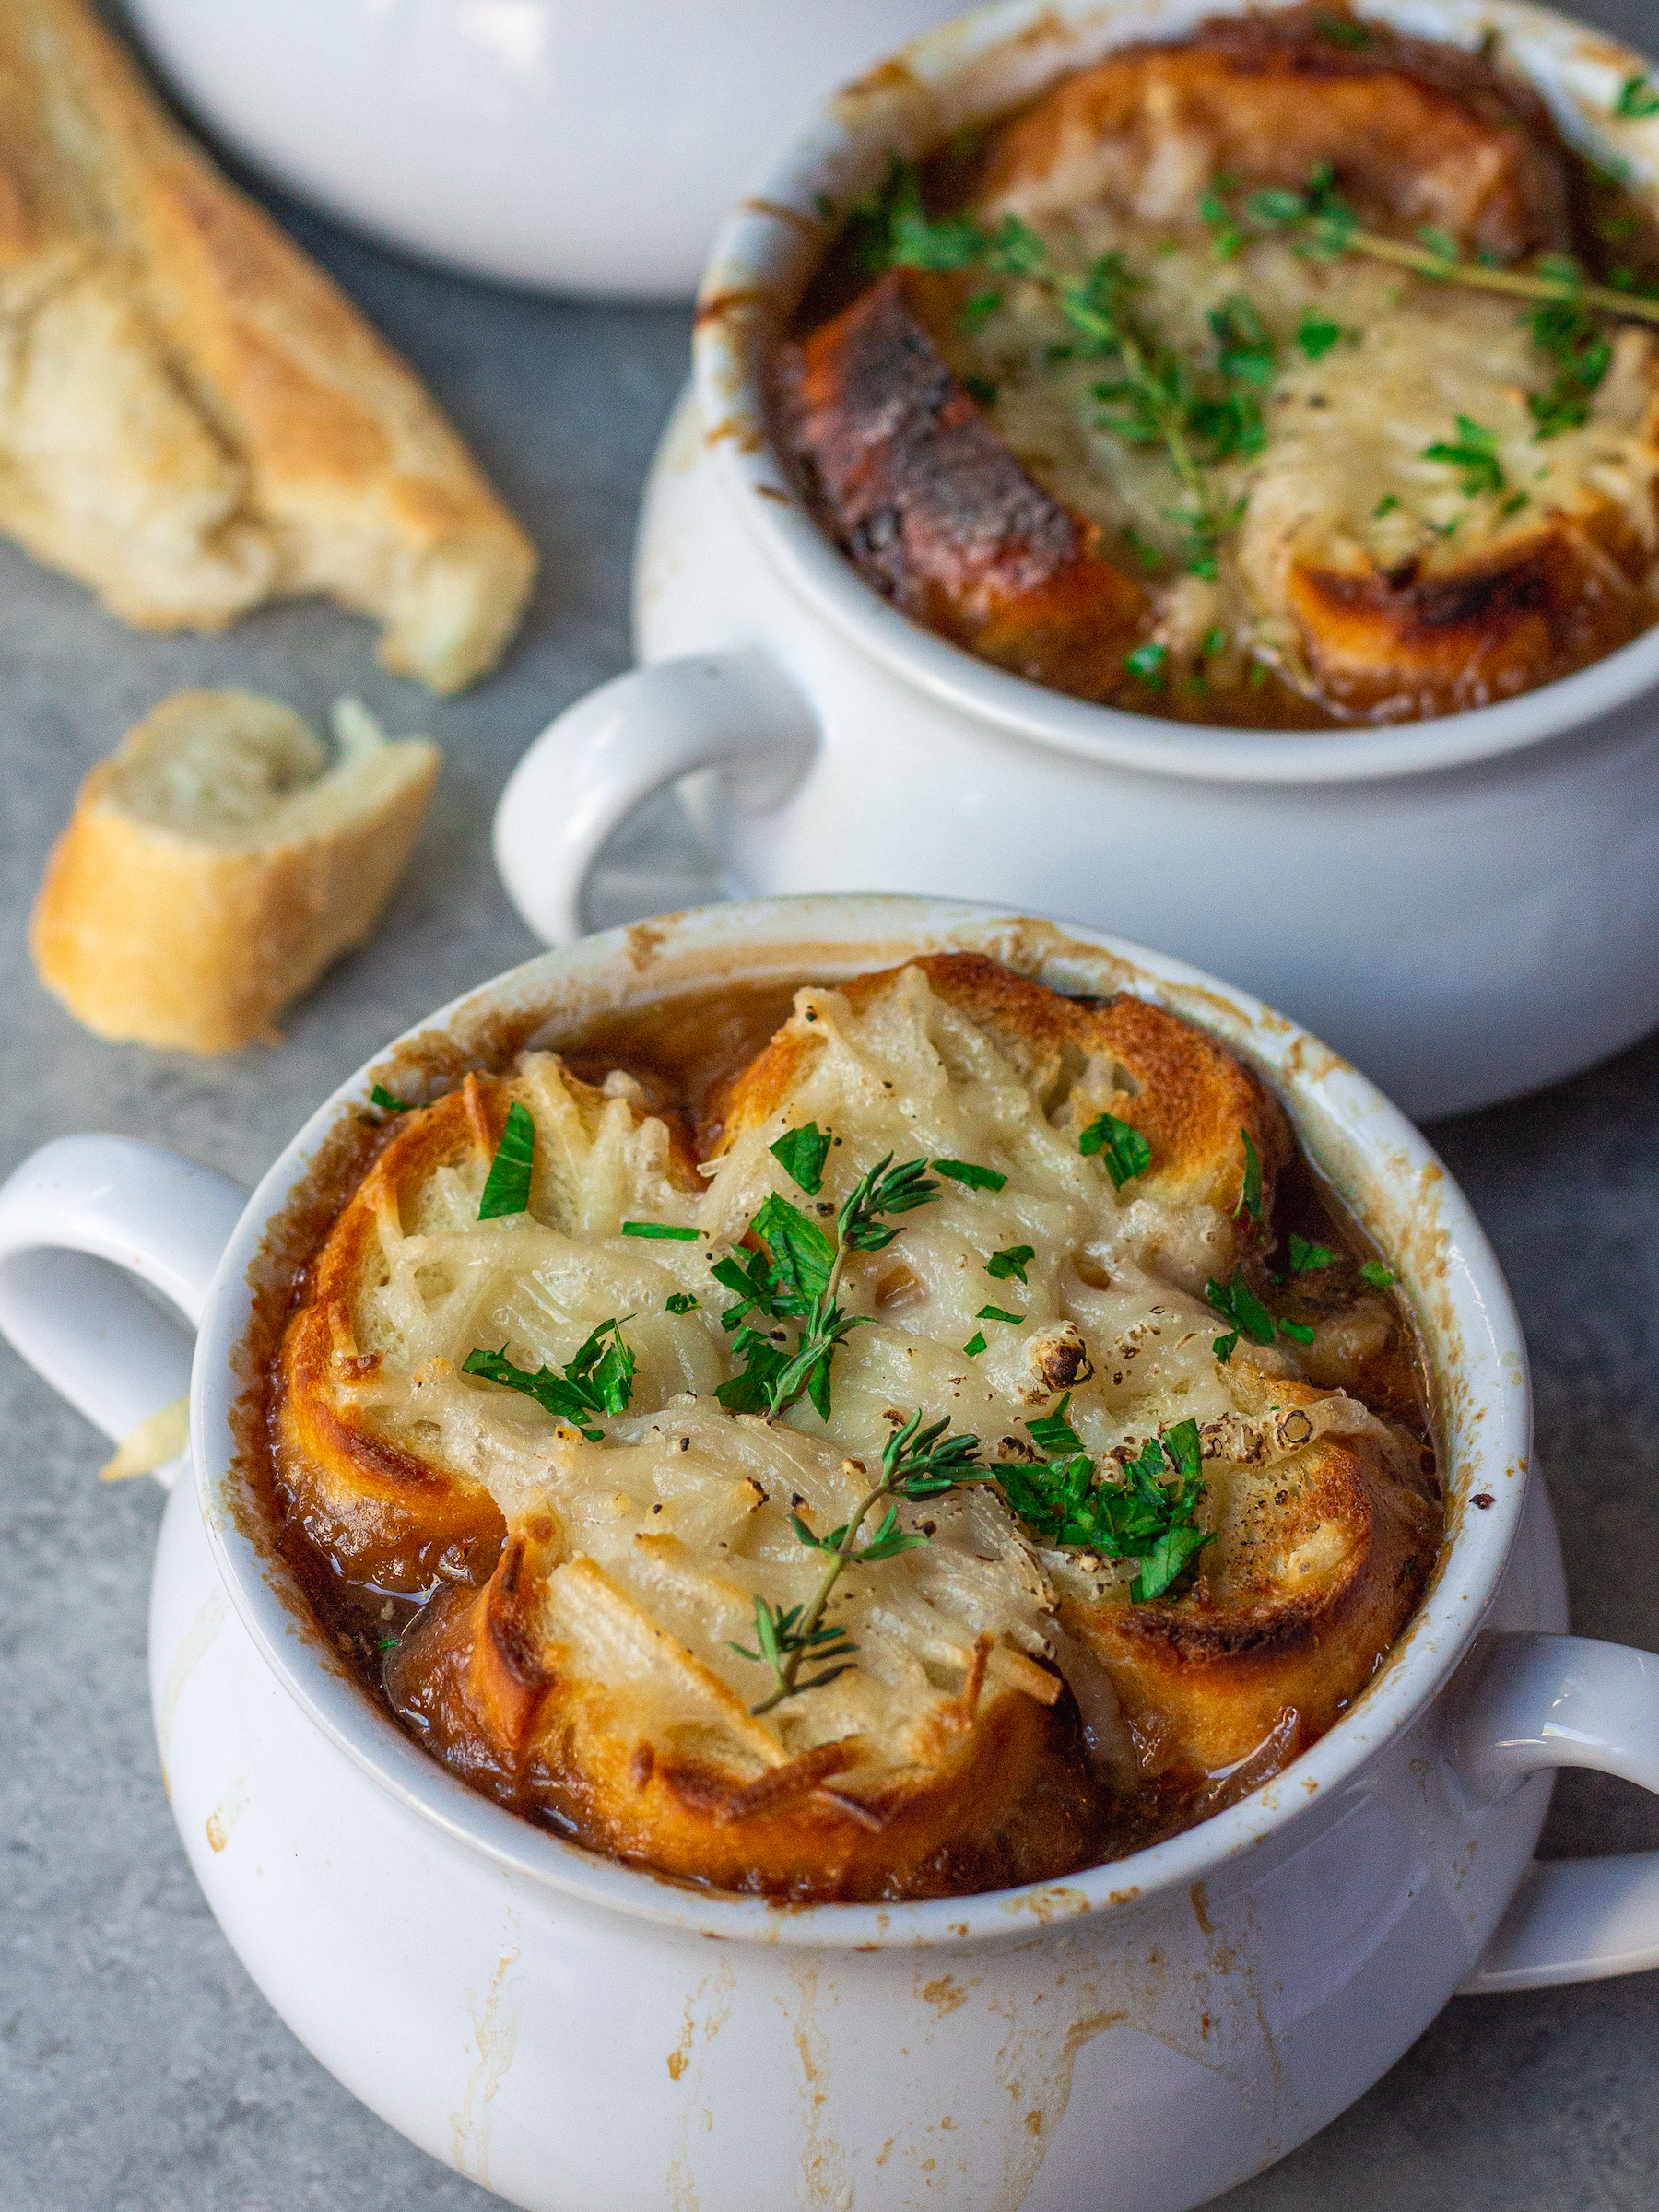 French onion soup 